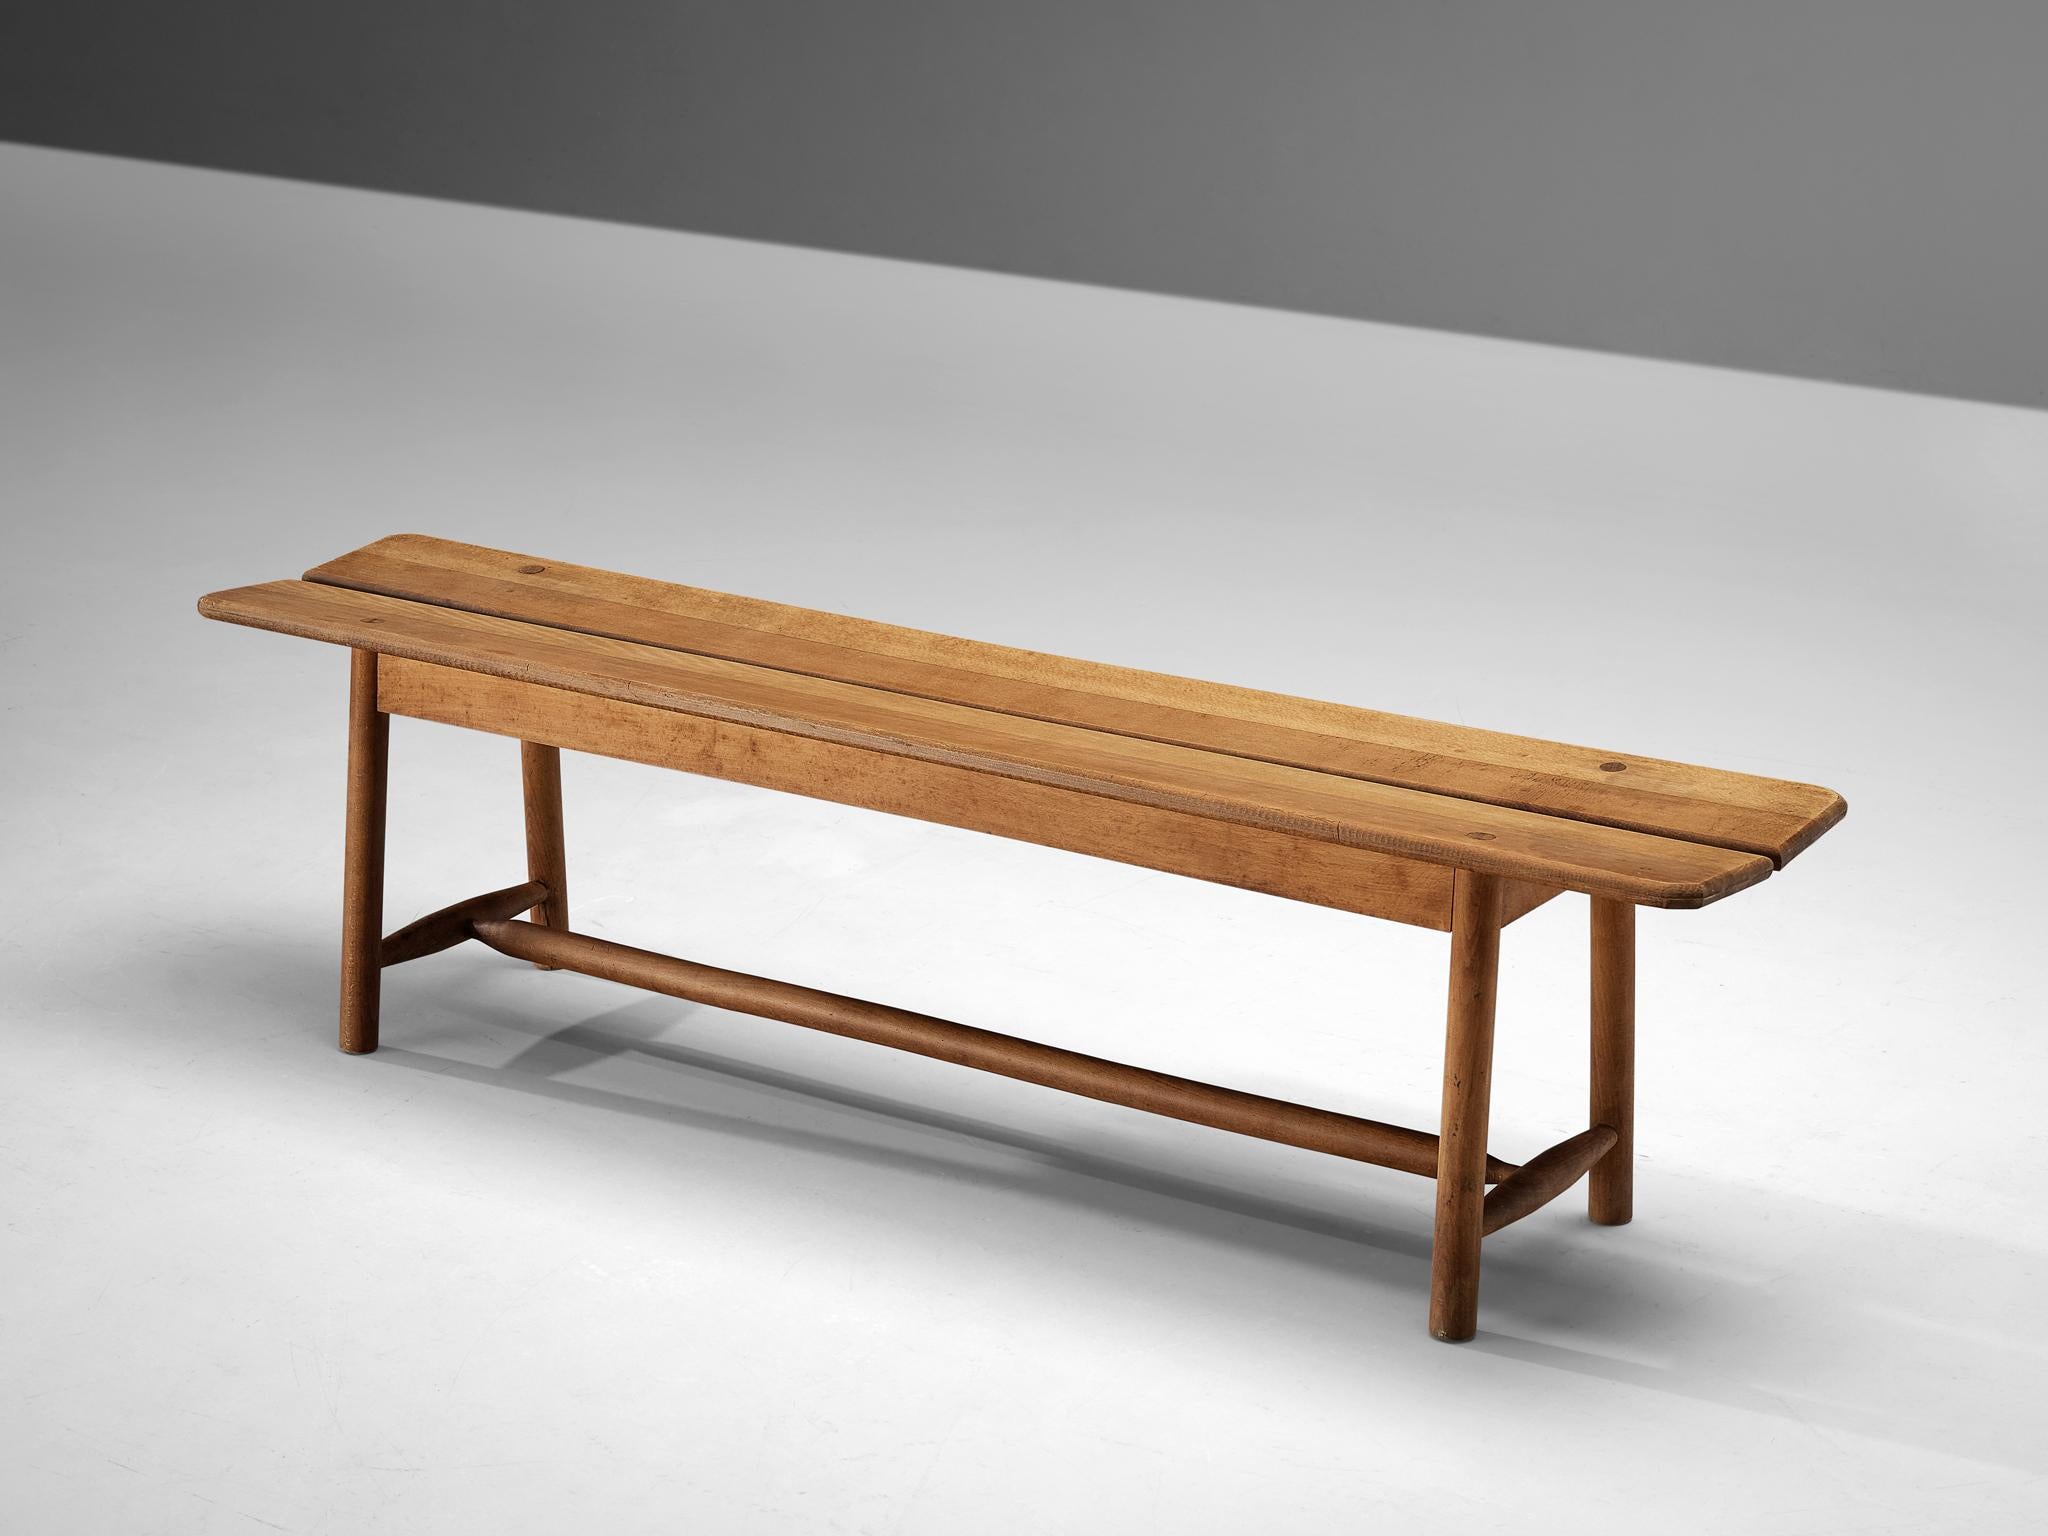 Pierre Gautier-Delaye, bench, solid beech, France, 1950s.

Simplistic bench by French designer Pierre Gautier-Delaye. The sleek design shows a beautiful line, which is emphasized by the open space in the middle of the bench. Moreover, the quality of